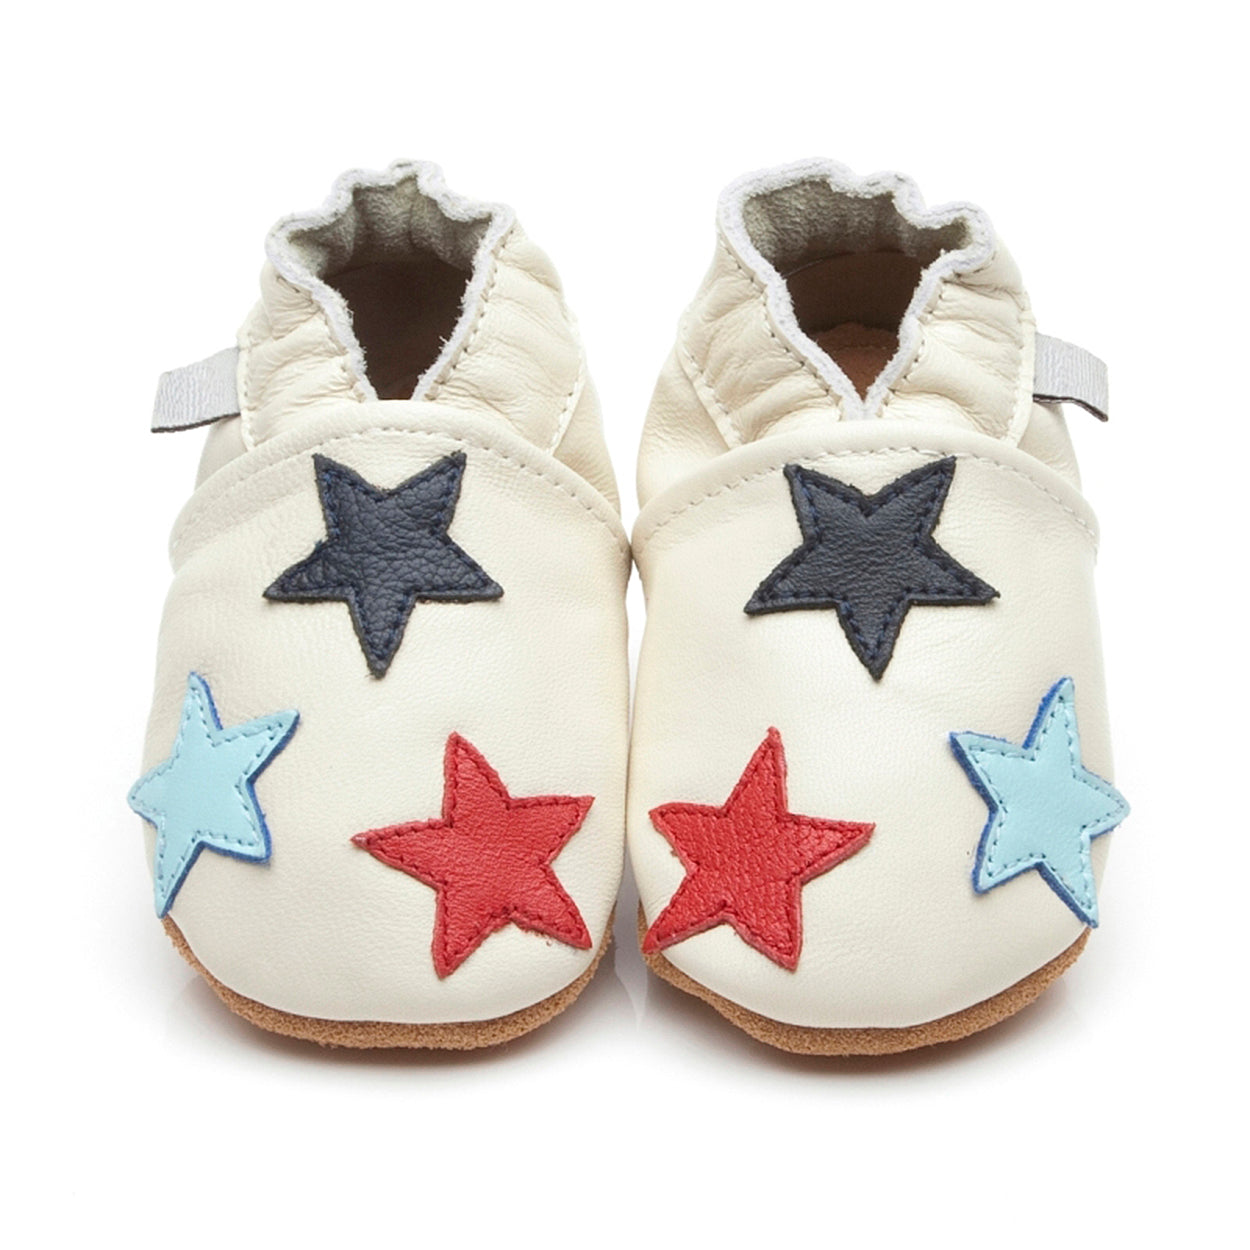 Soft Leather Baby Shoes Little Stars Cream